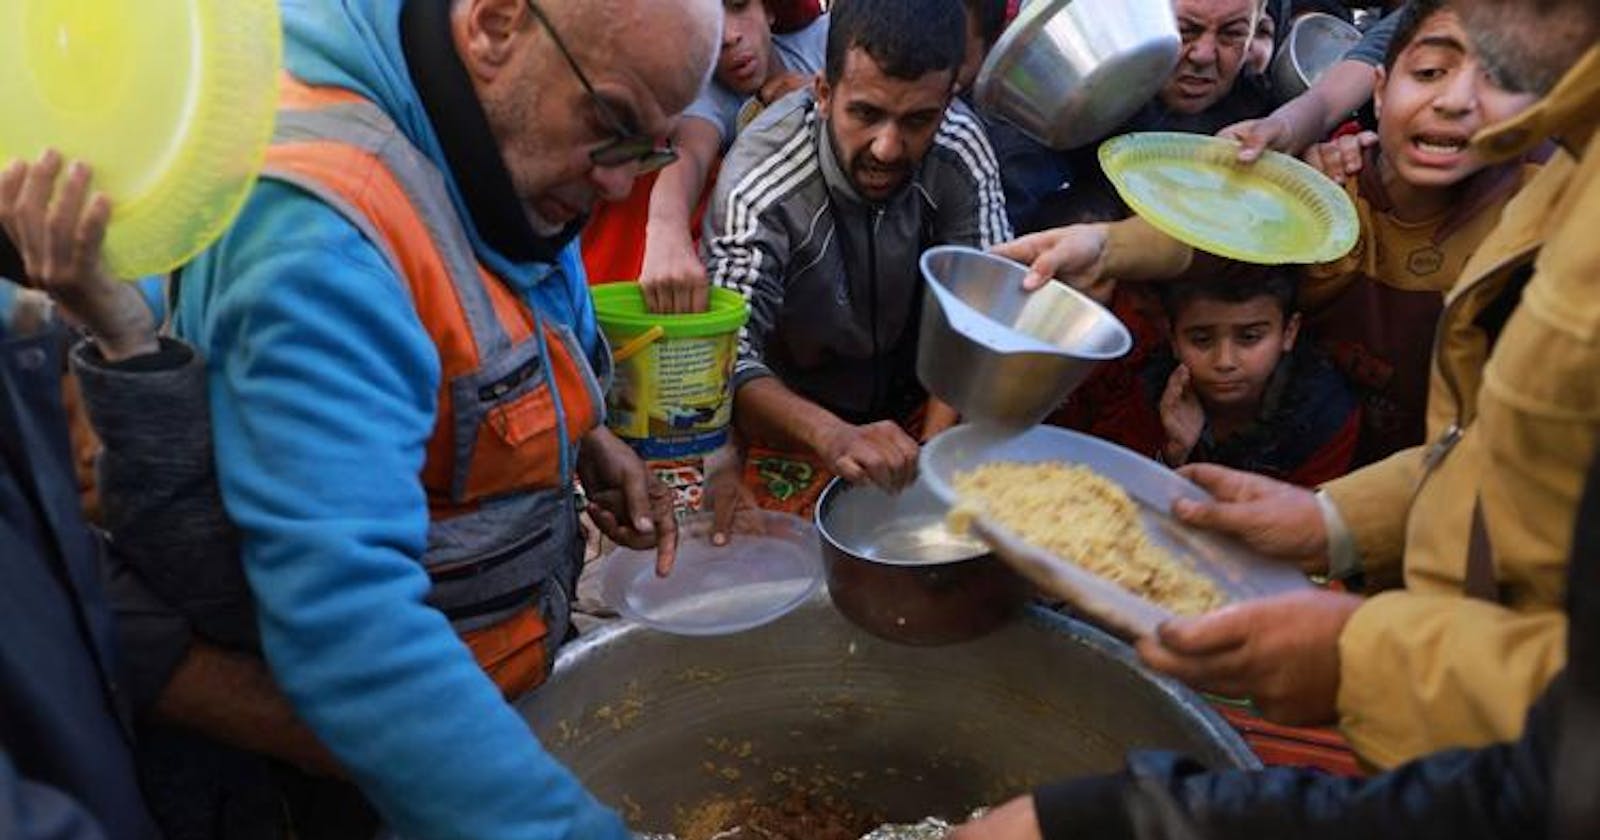 ‘It’s chaos:’ Starving Gazans dig for food, supplies under the rubble